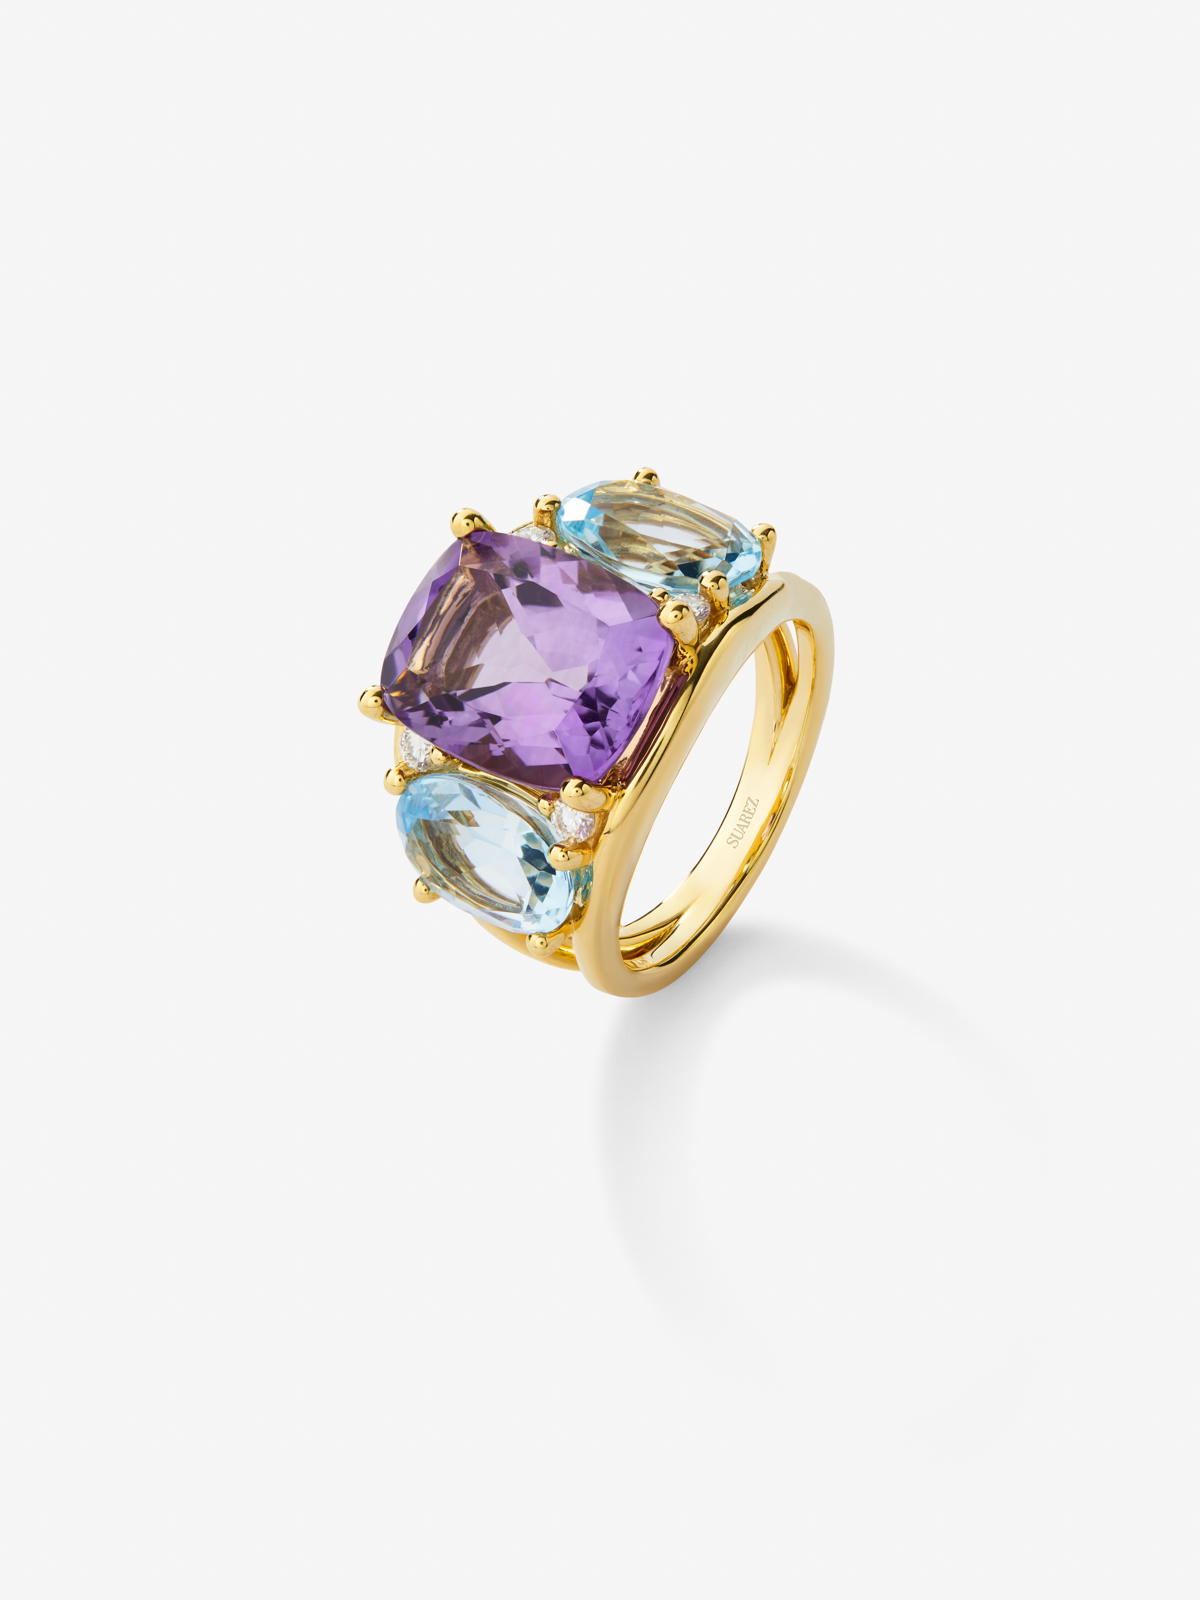 18K yellow gold ring with purple ameter in 5.5 cts Cushion size, Sky blue sky tapacios in 4.65 cts and white diamonds in a brilliant size of 0.15 cts